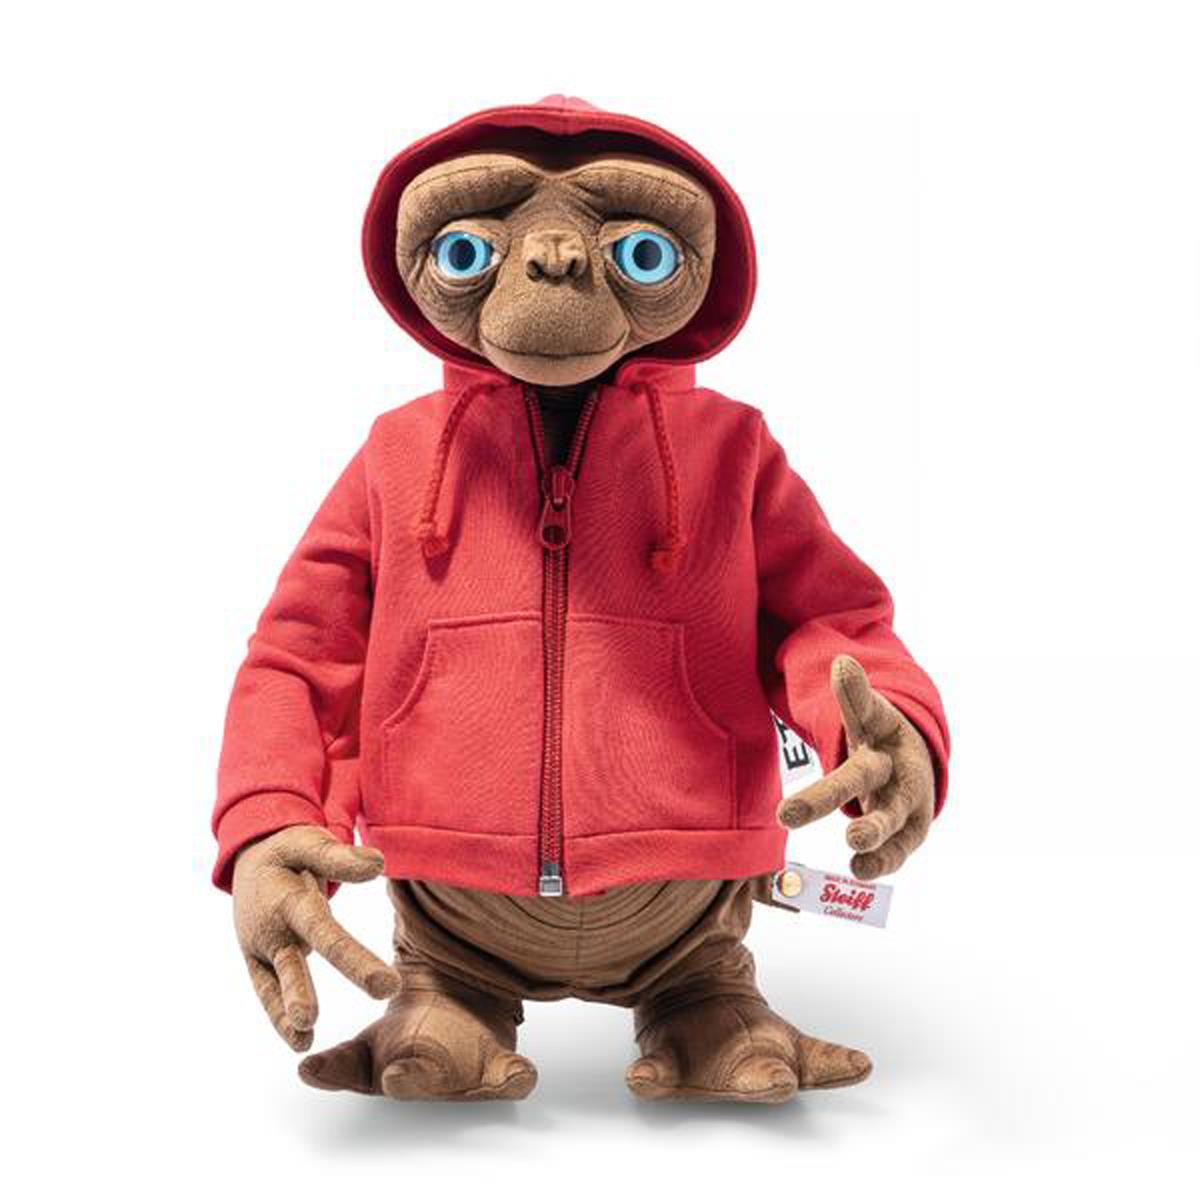 Steiff Limited Edition E.T Extra Terrestrial